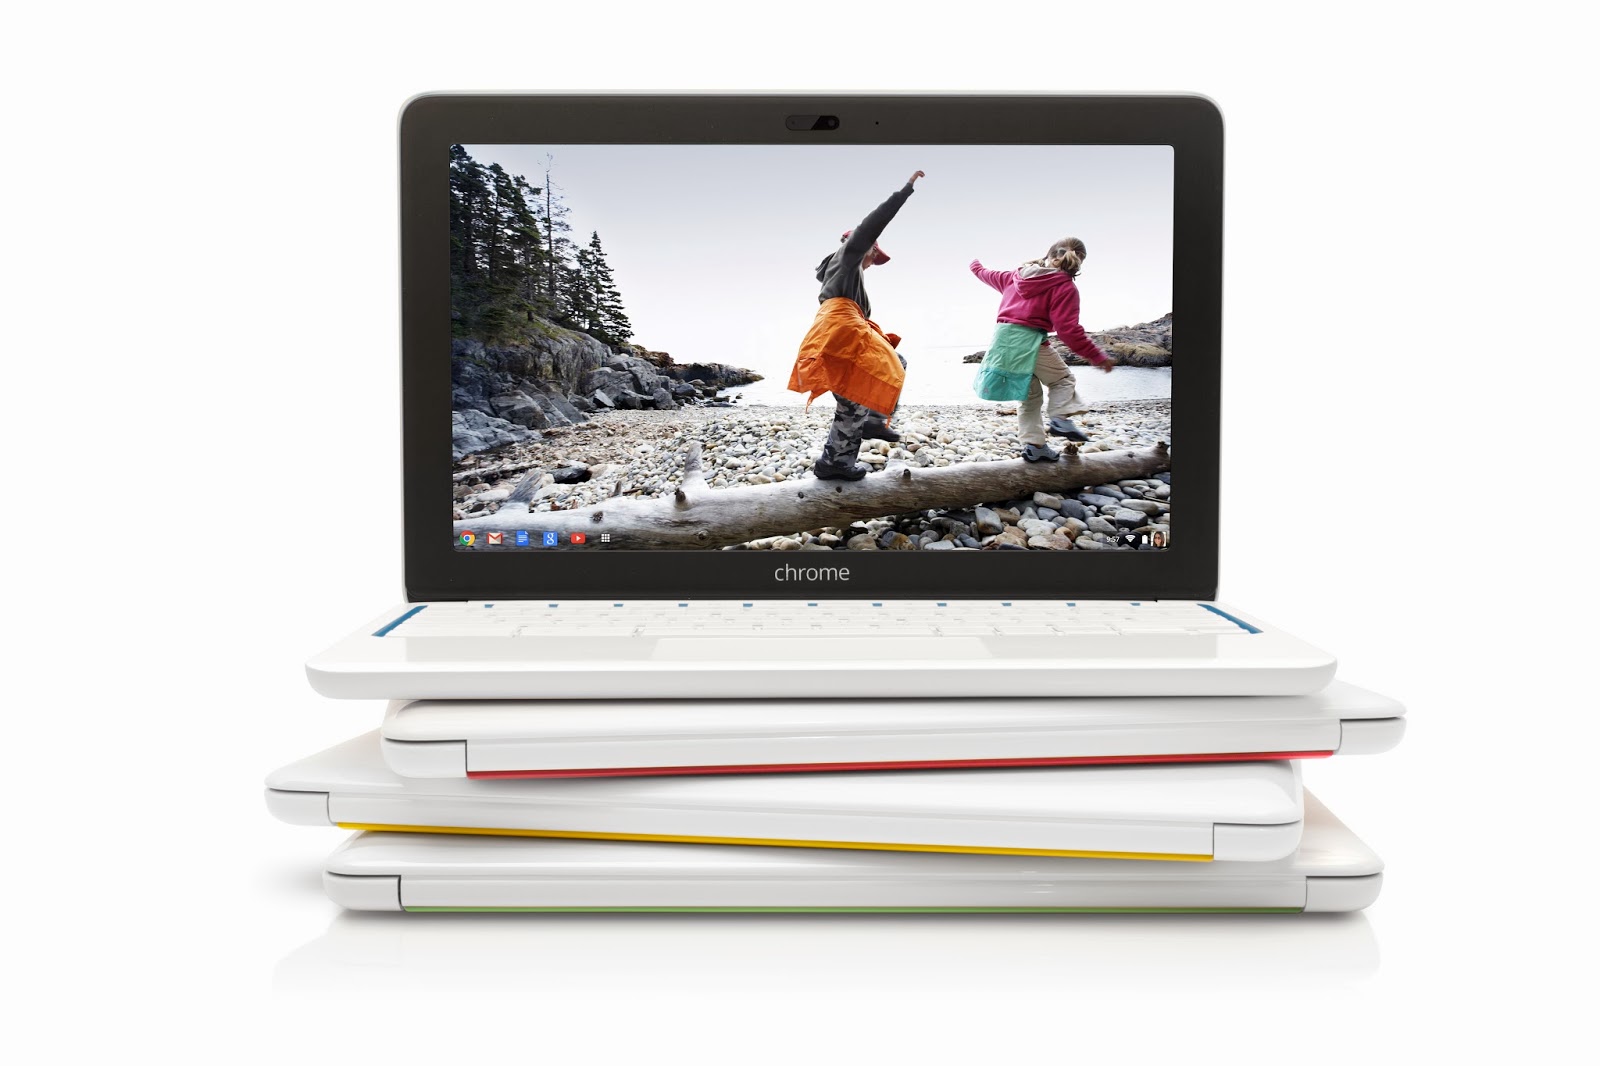 HP Chromebook 11 - for some reason we don't have an alt tag here